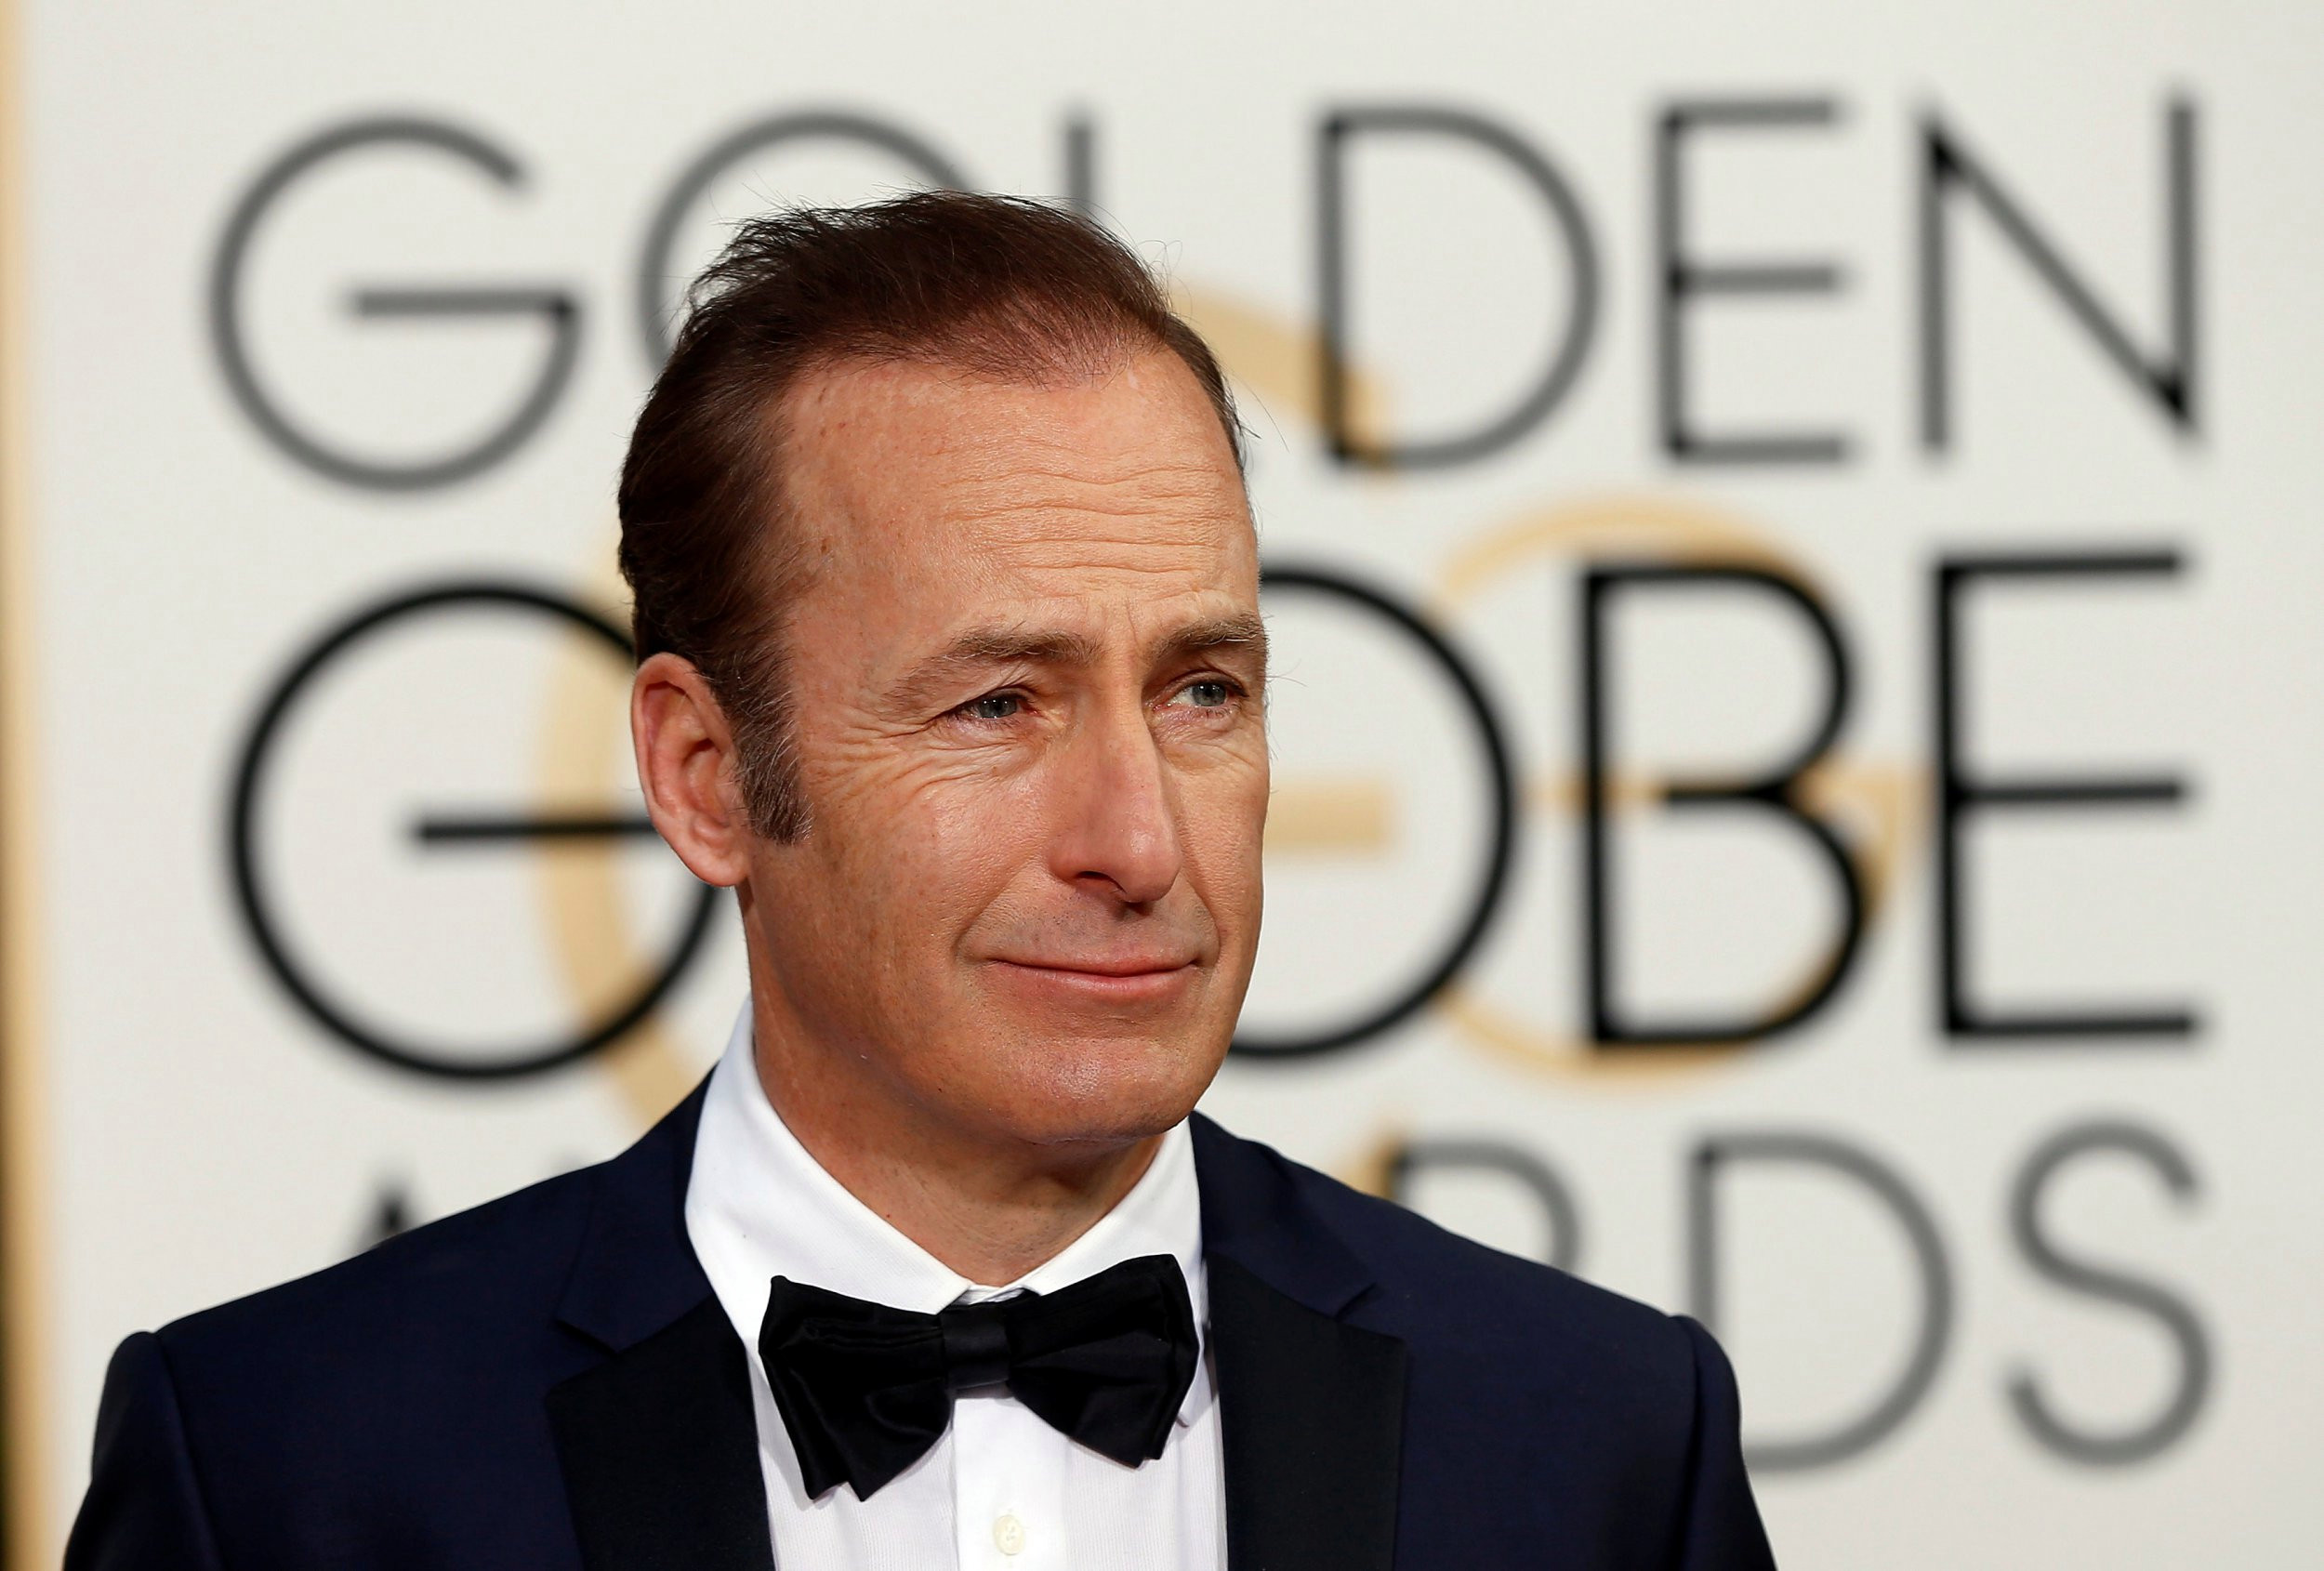 Better Call Saul’s Bob Odenkirk tells fans he is ‘doing great’ after heart attack on set